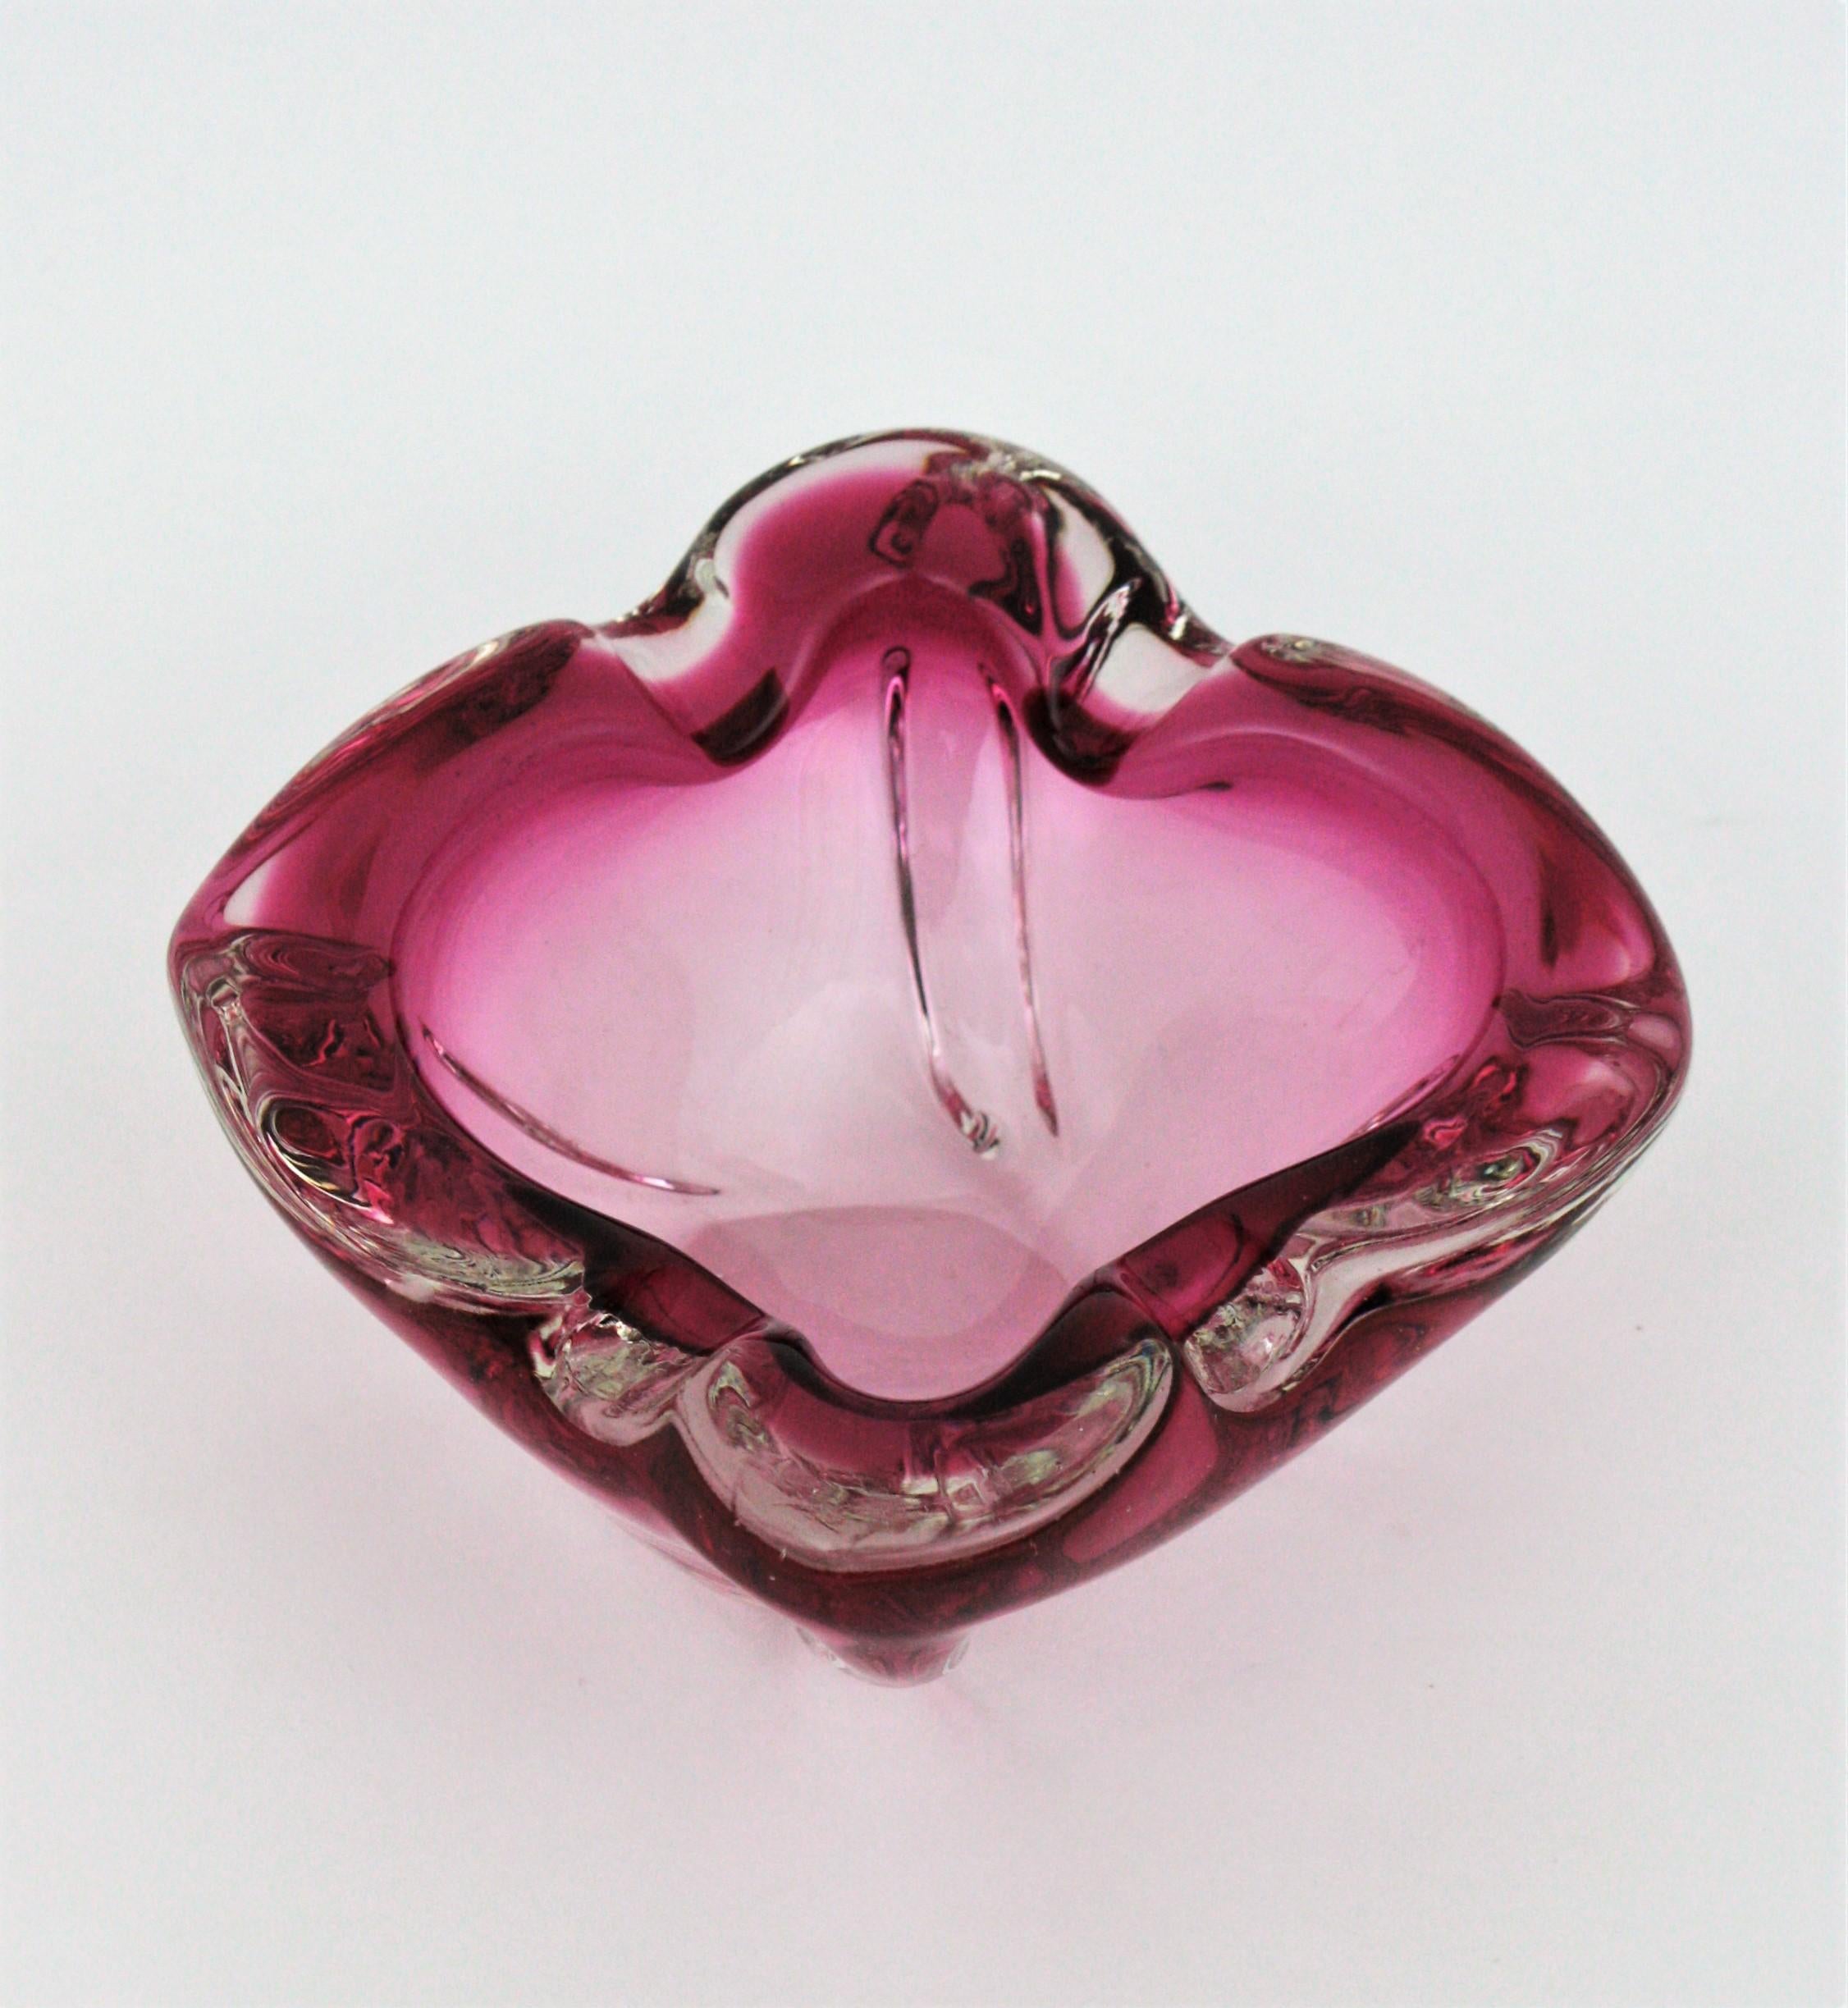 Italian Seguso Murano Sommerso Pink and Clear Glass Bowl / Ashtray